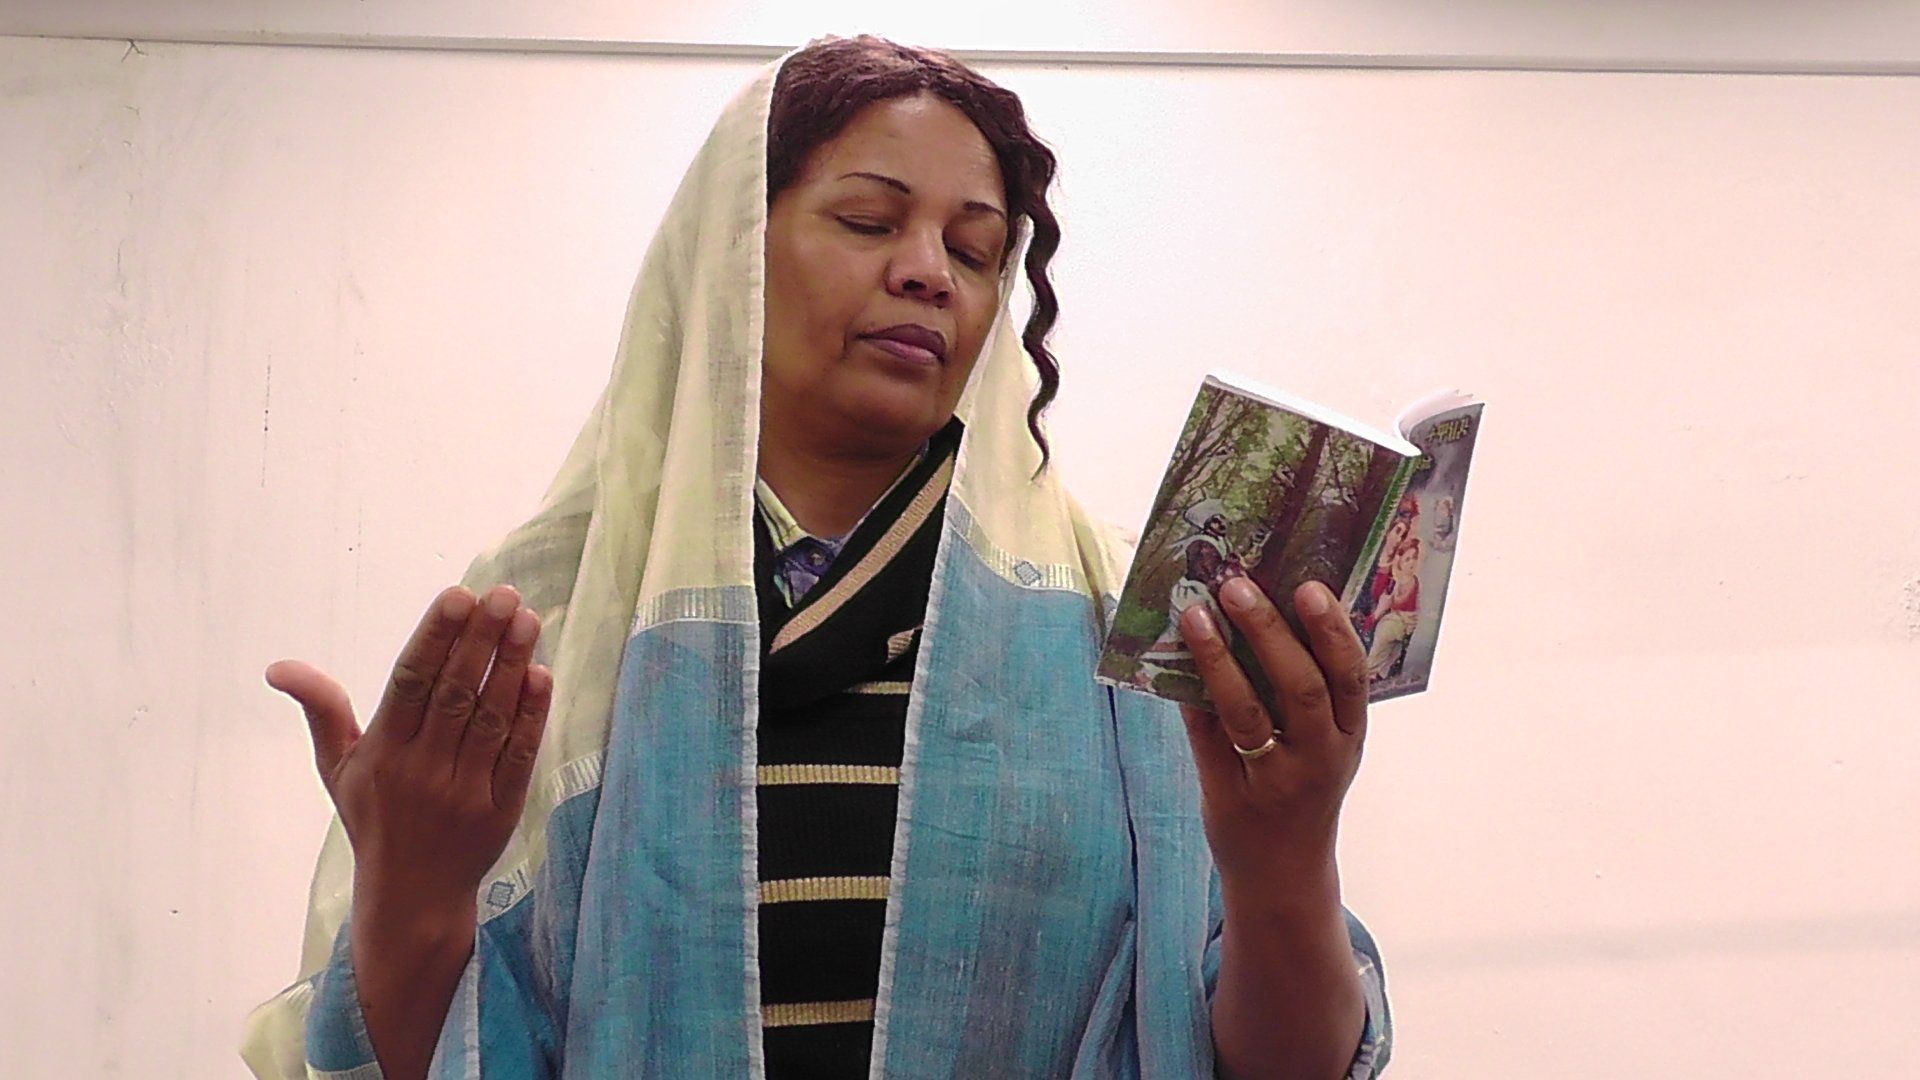 a woman wearing a head scarf is holding a book in her hands .